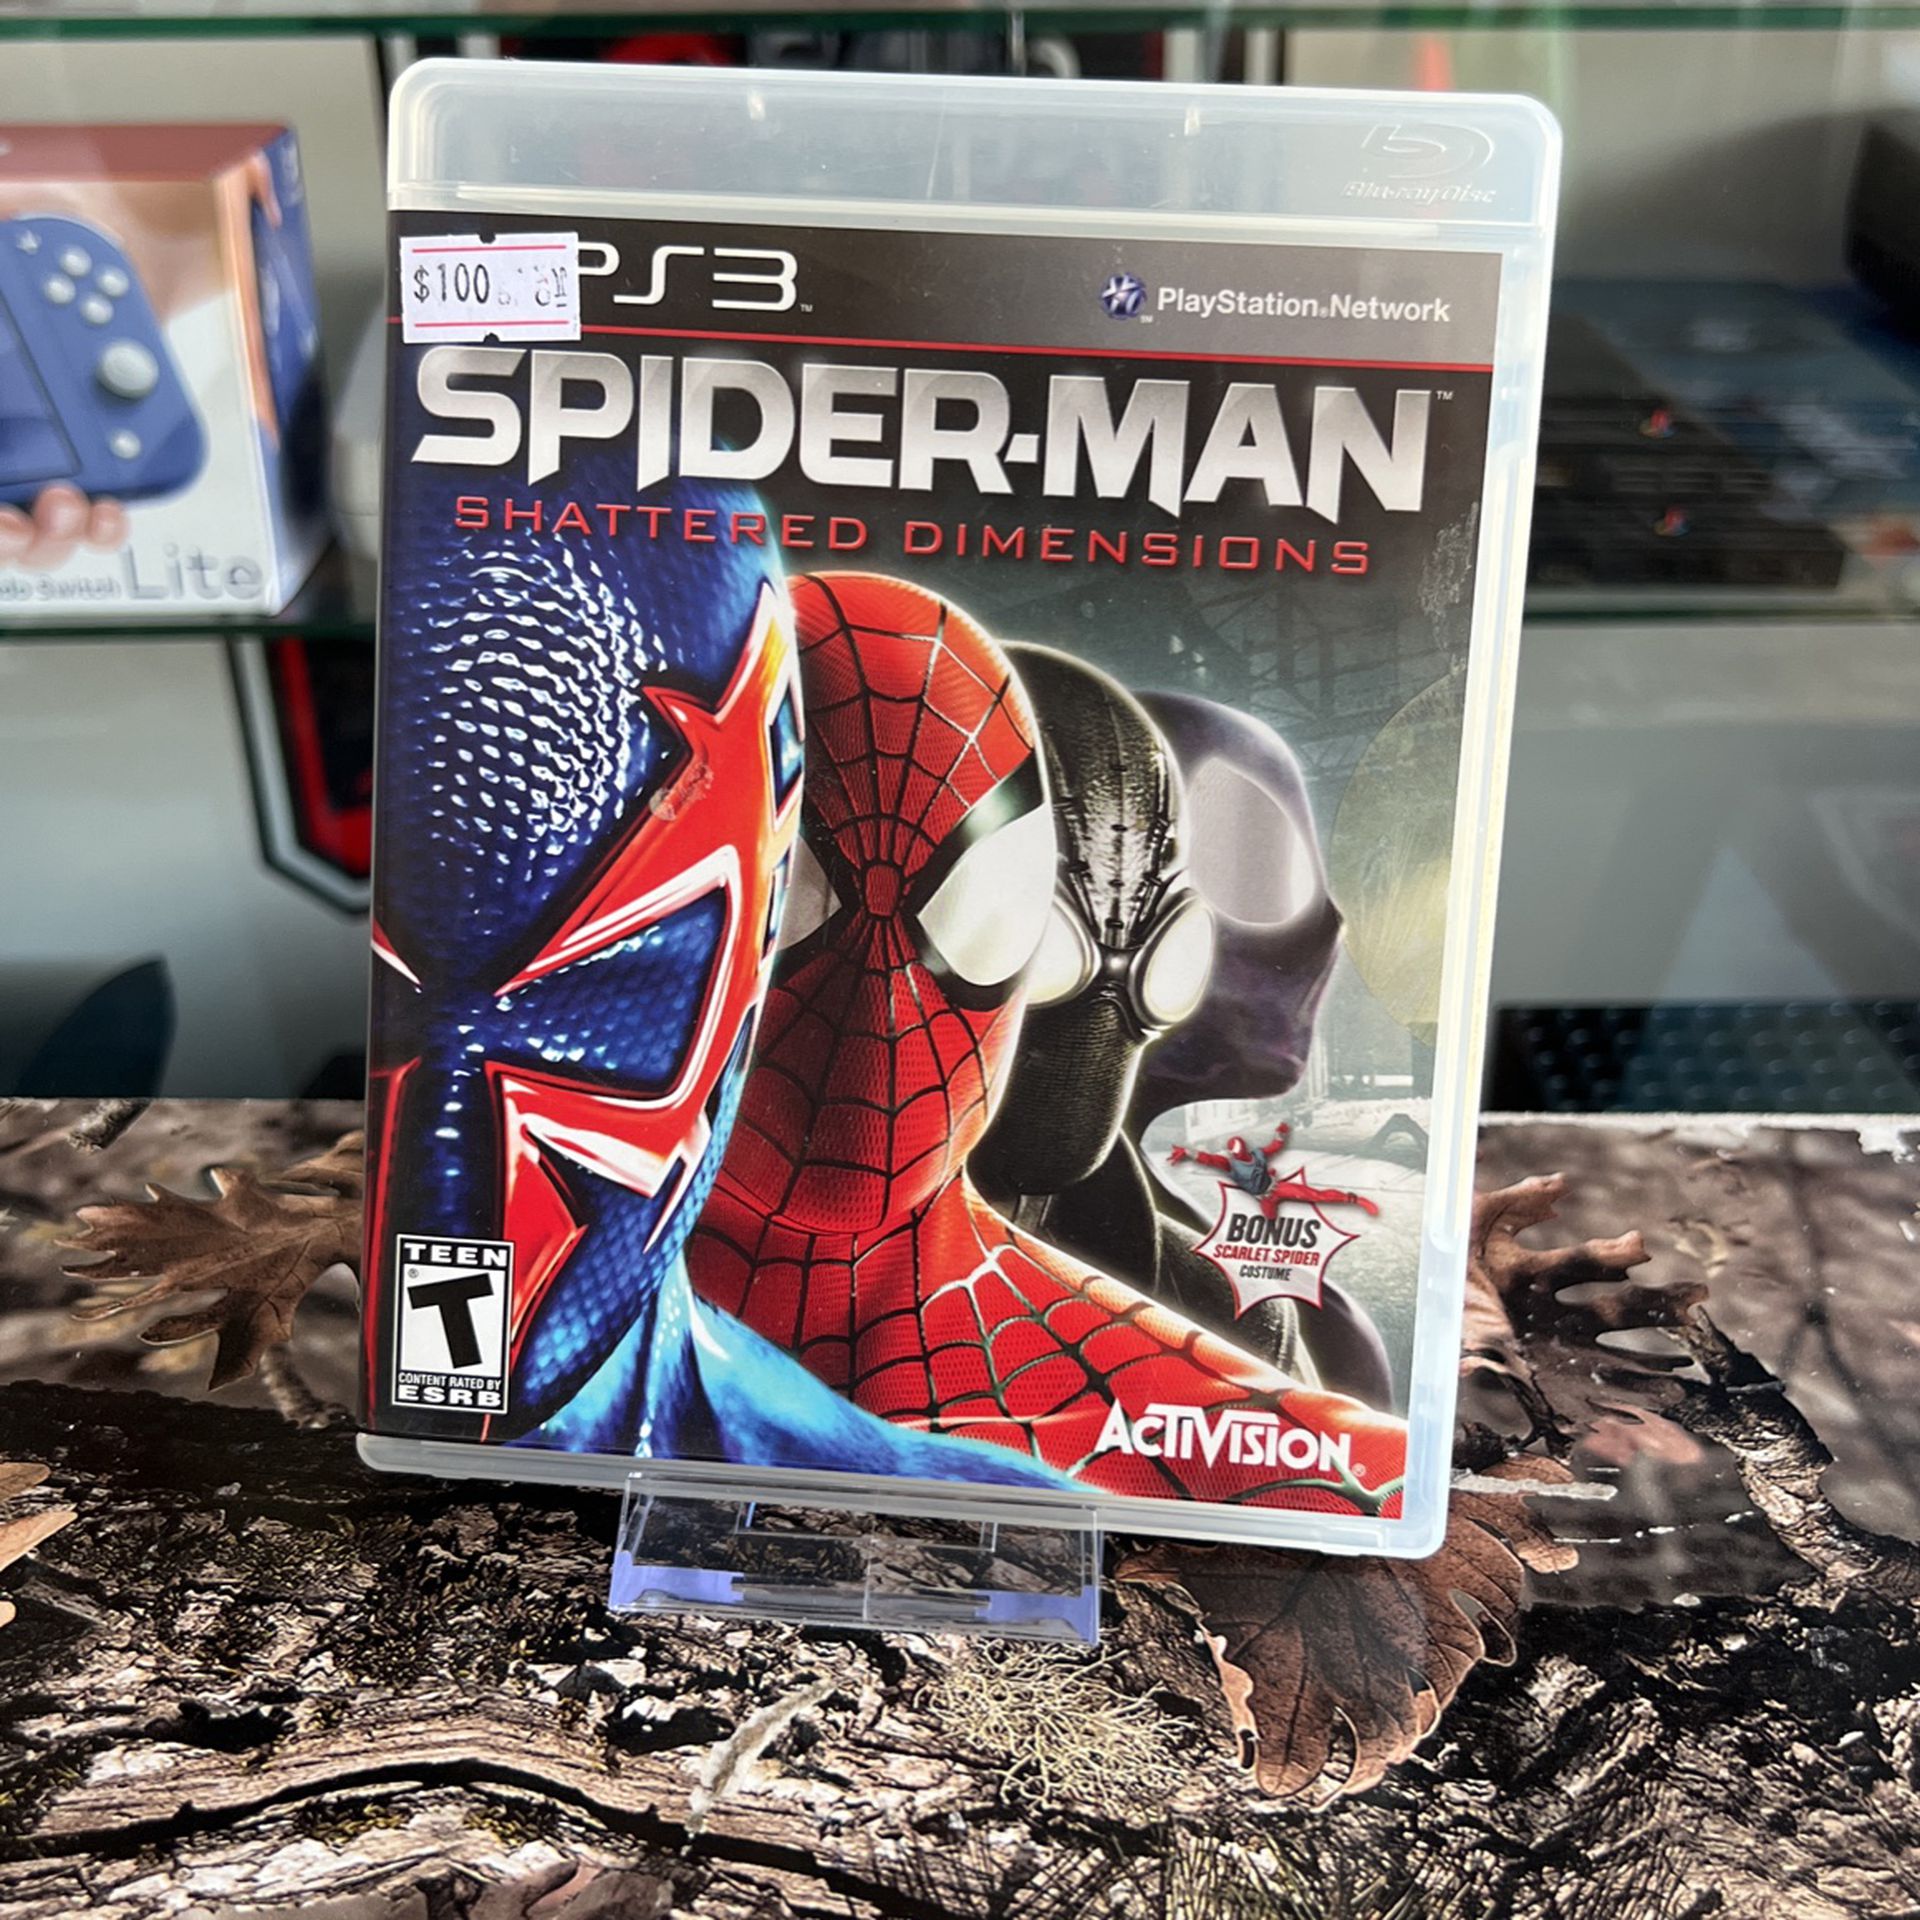 Spider-Man Shattered Dimensions - PS3 CIB for Sale in Perris, CA